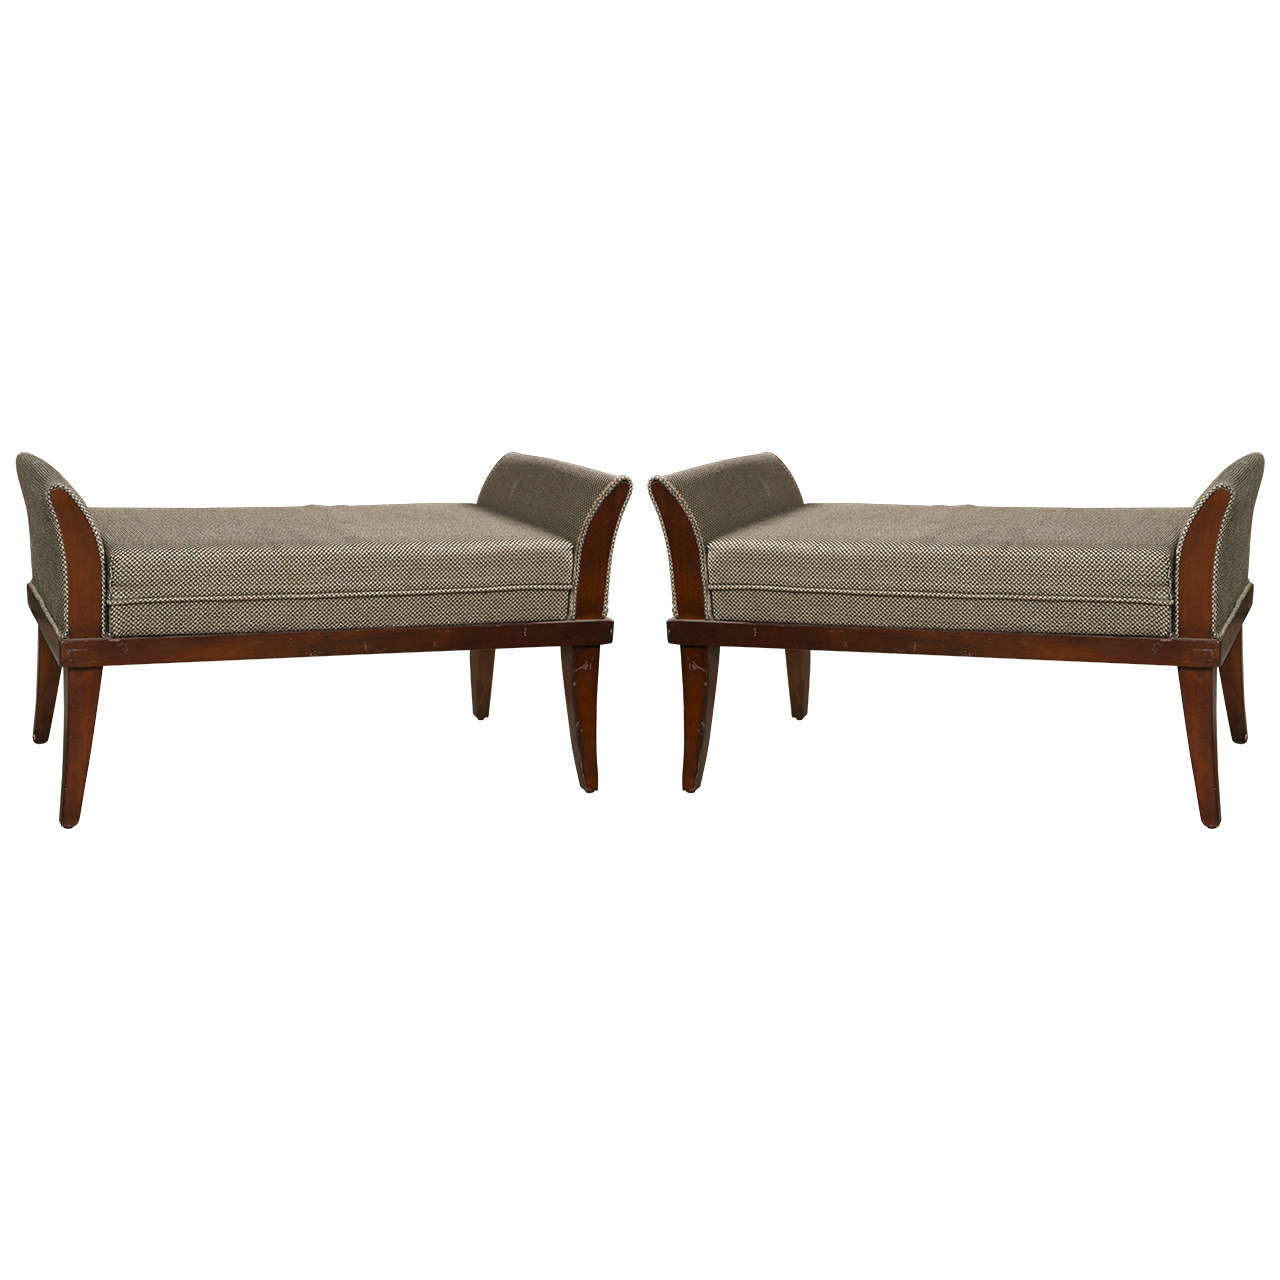 Pair of Mid-Century Modern Window Benches or Stools